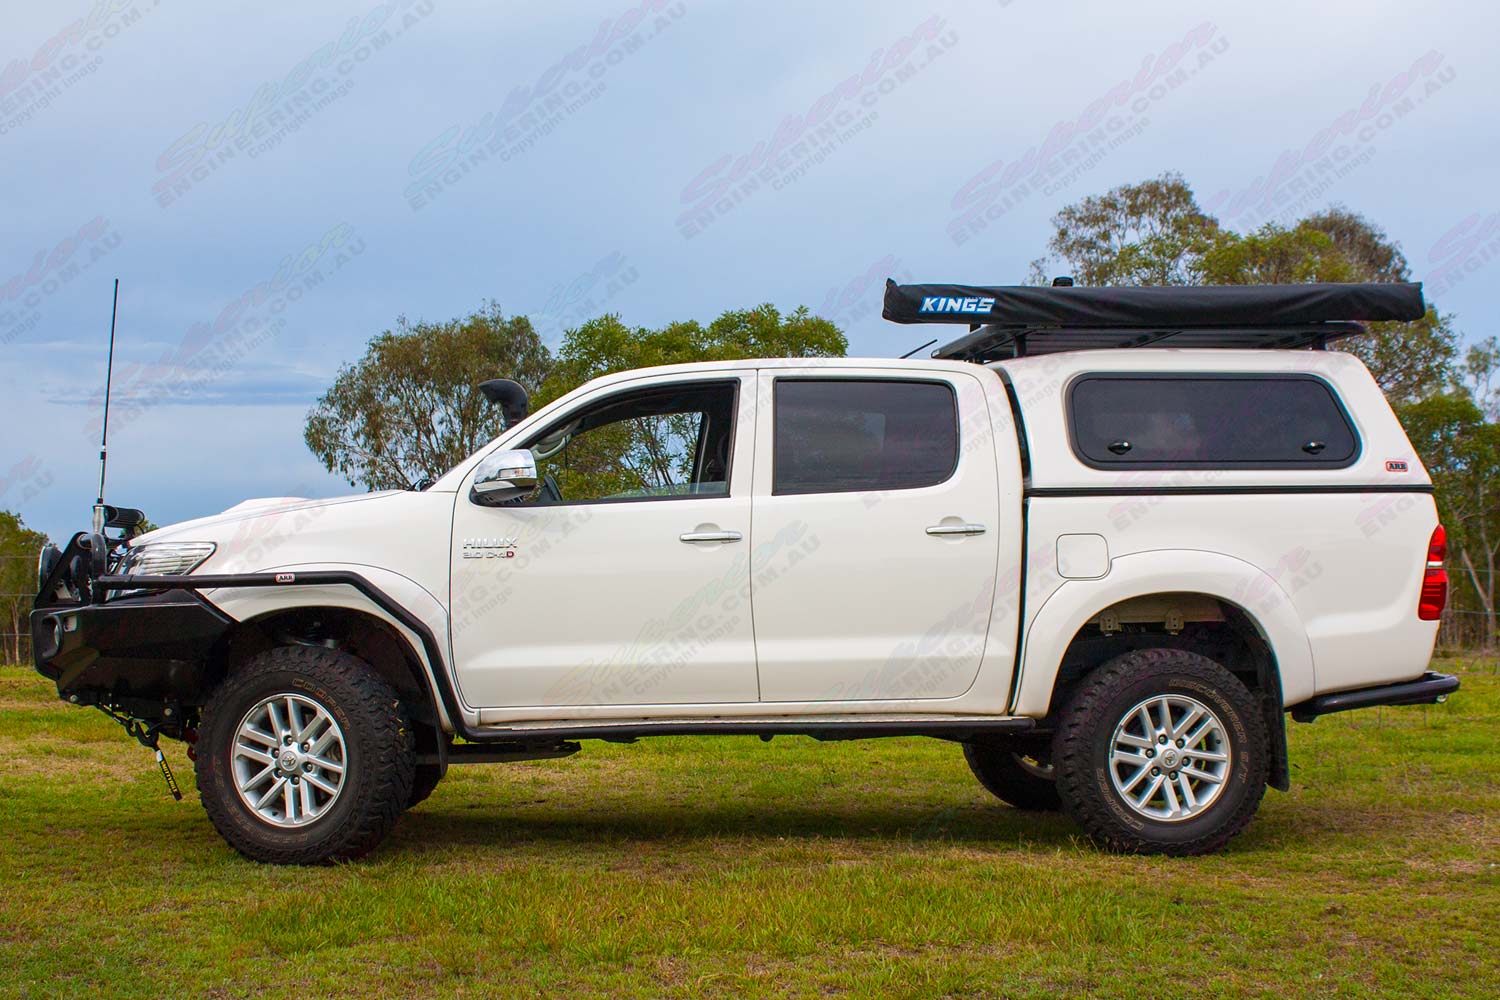 Left side view of a white dual cab Toyota Hilux fitted with a 2 inch Bilstein Suspension kit, Superior upper control arms and swaybar relocation plate